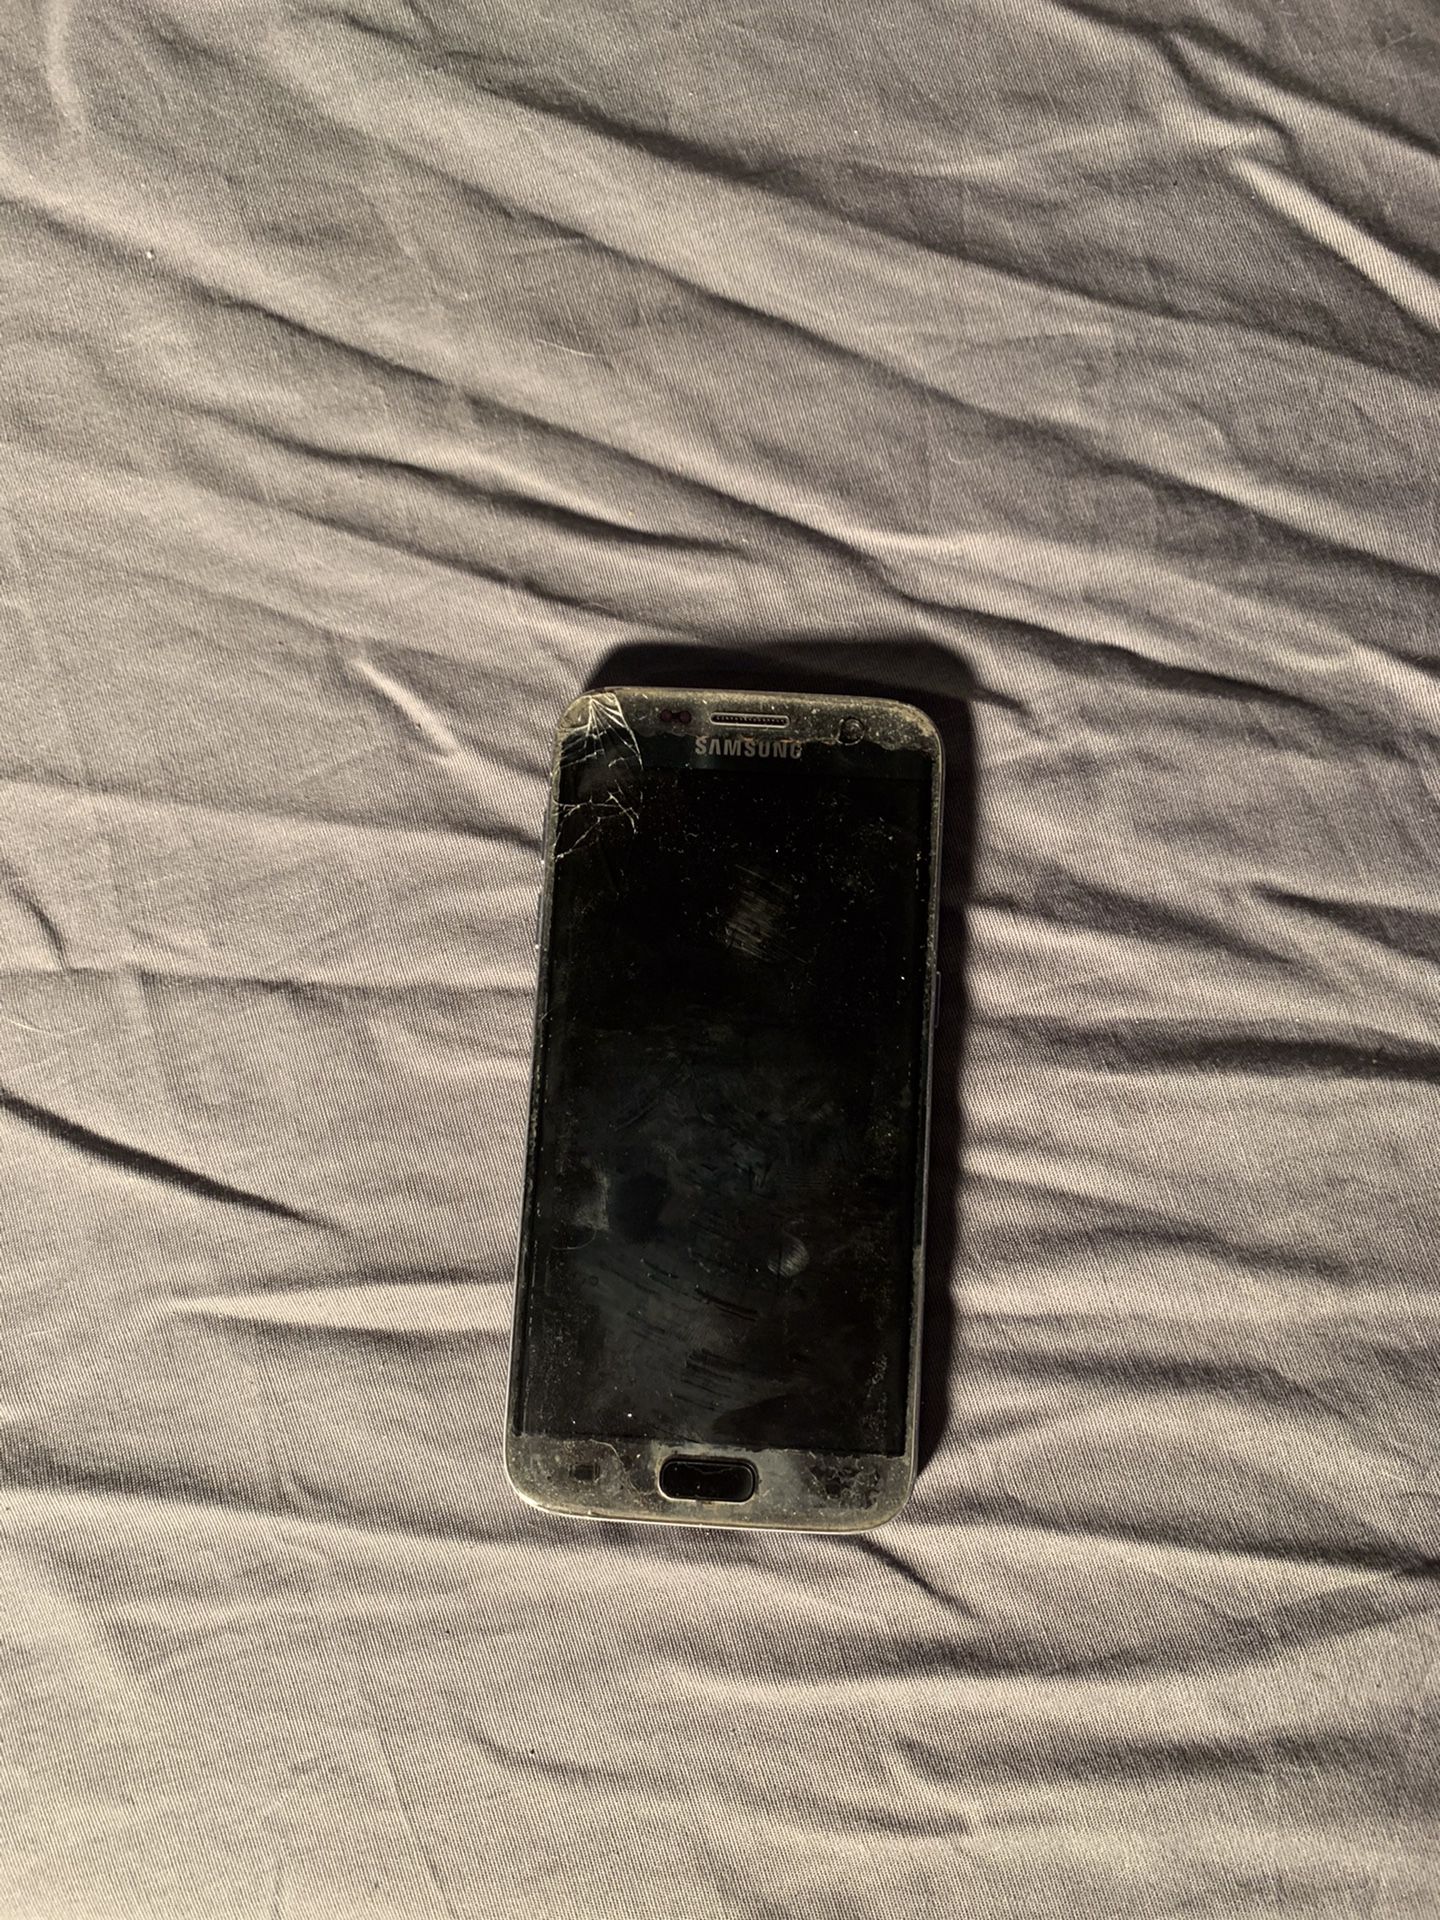 Samsung Galaxy S7 (Barely Functional!)